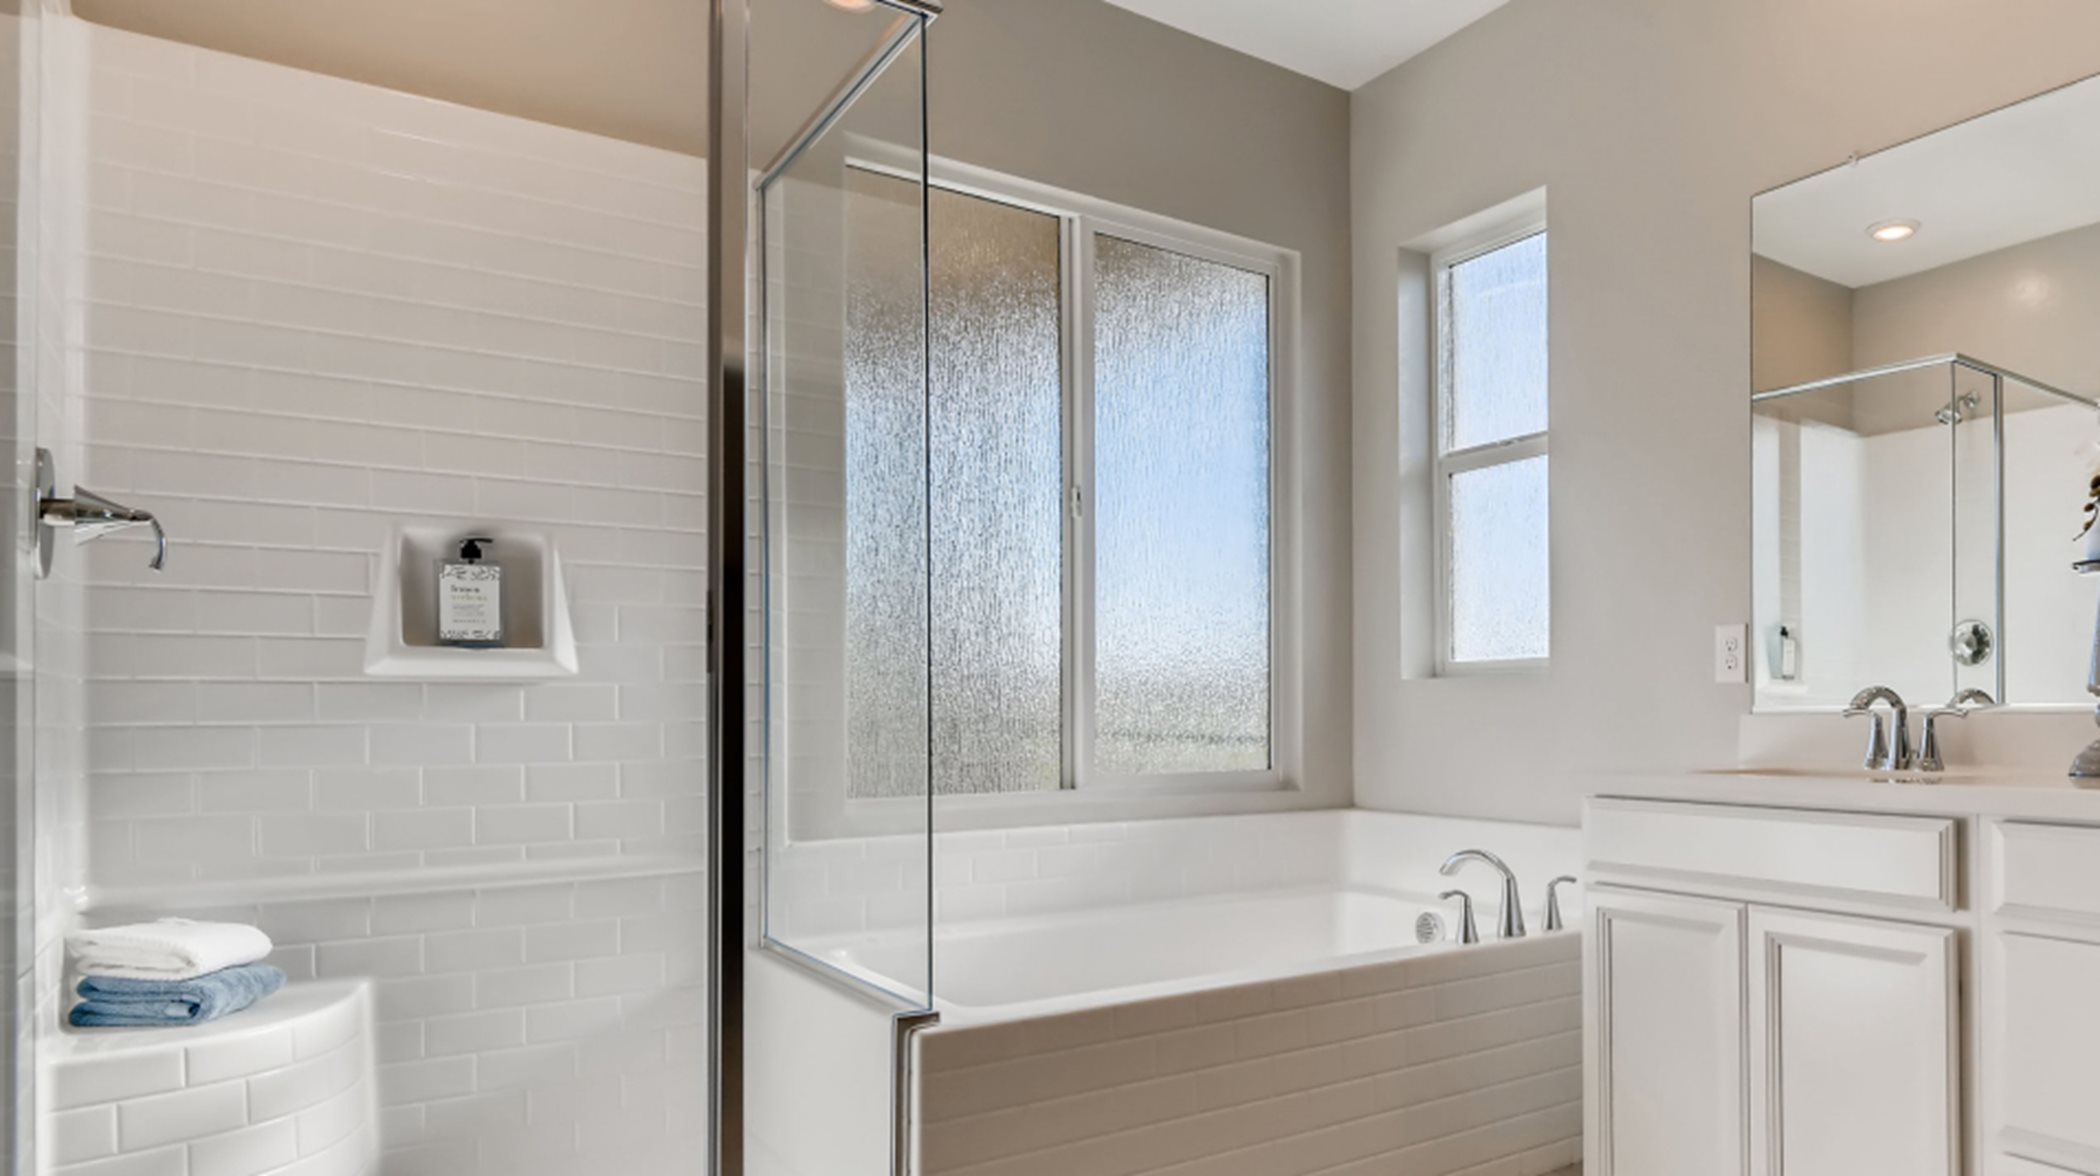 Separate shower and soaking tub in the bathroom of the owner’s suite